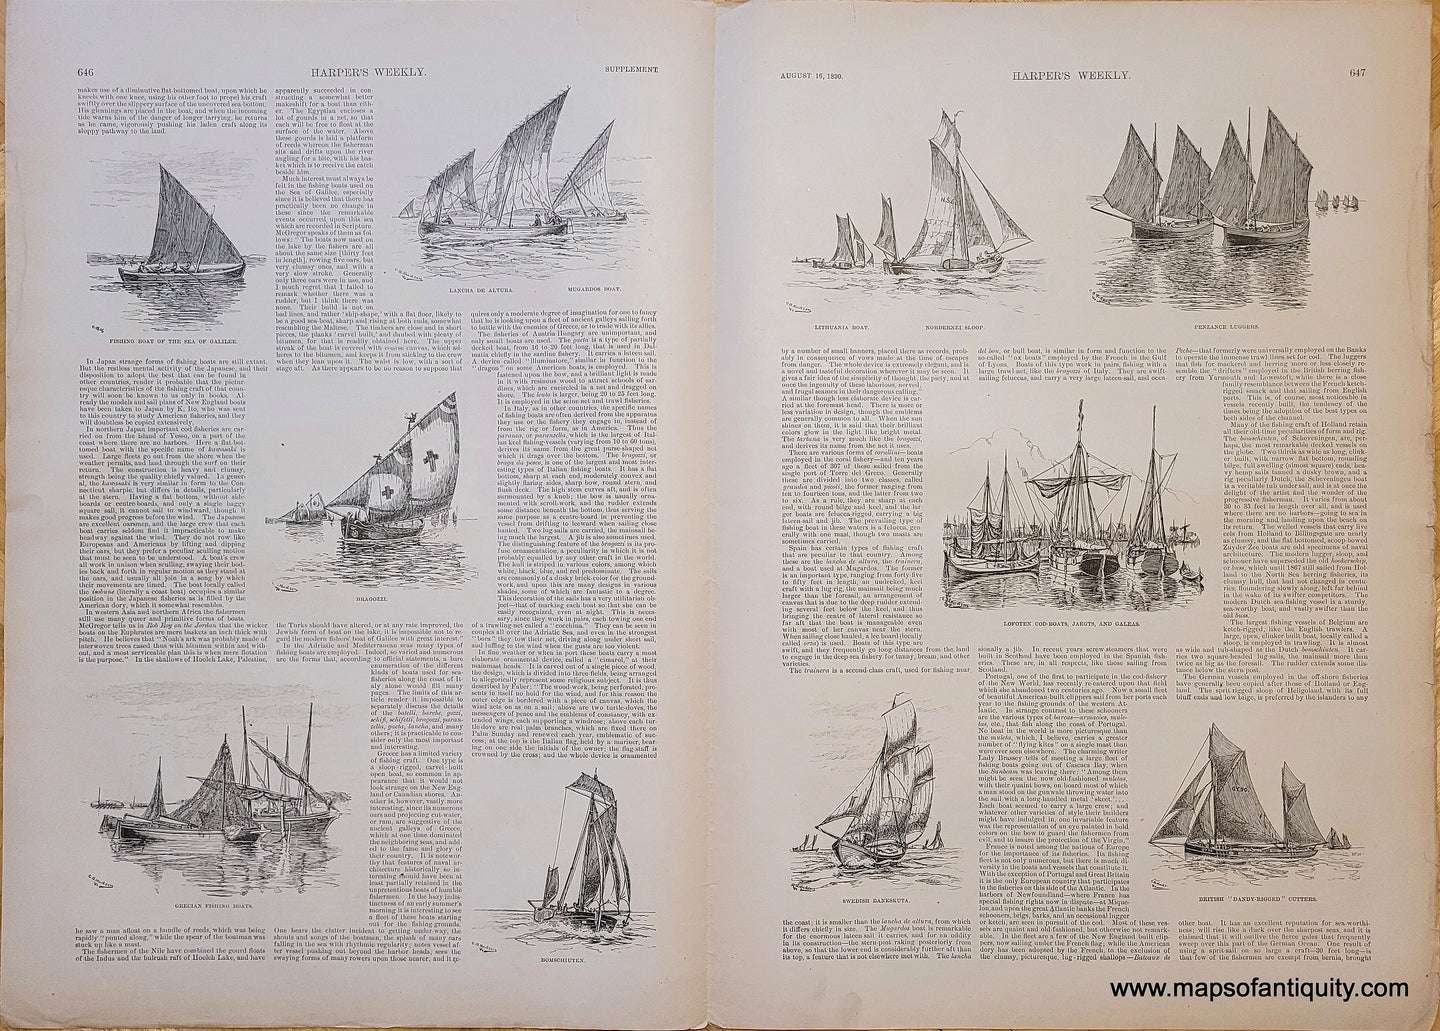 Genuine-Antique-Print-The-Fishing-Craft-of-the-World-Antique-Prints-Ship-Prints-1890-Harpers-Weekly-Maps-Of-Antiquity-1800s-19th-century